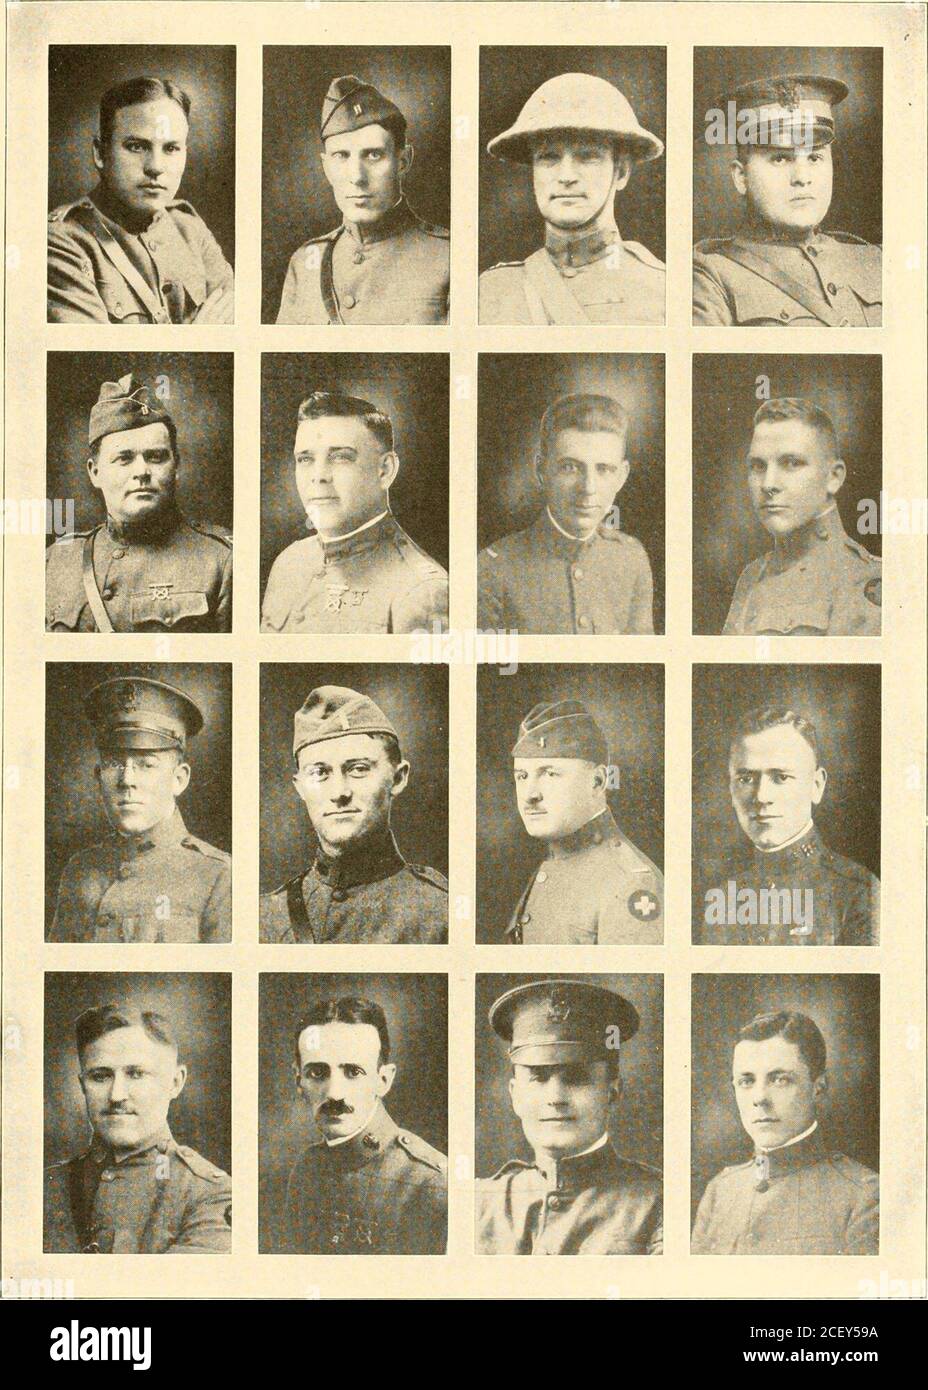 . Illinois in the World War; an illustrated record prepared with the coöperation and under the direction of the leaders in the state's military and civilian organizations. icer2nd Lieutenant William H. MerrimanBilleting Officers ist Lieutenant Oliver J. Sheehyist Lieutenant George O. Warren2nd Lieutenant Frederick A. Prince,Assistant to G-i and G-3Headquarters Troop Captain Herbert W. Stylesist Lieutenant Thomas J. Cochrane2nd Lieutenant Richard R. NotterAttached ist Lieutenant Arthur W. Larson, Commanding Postal Detachmentist Lieutenant Herbert H. Harris, Di-vision Recreation Officer2nd Lieut Stock Photo